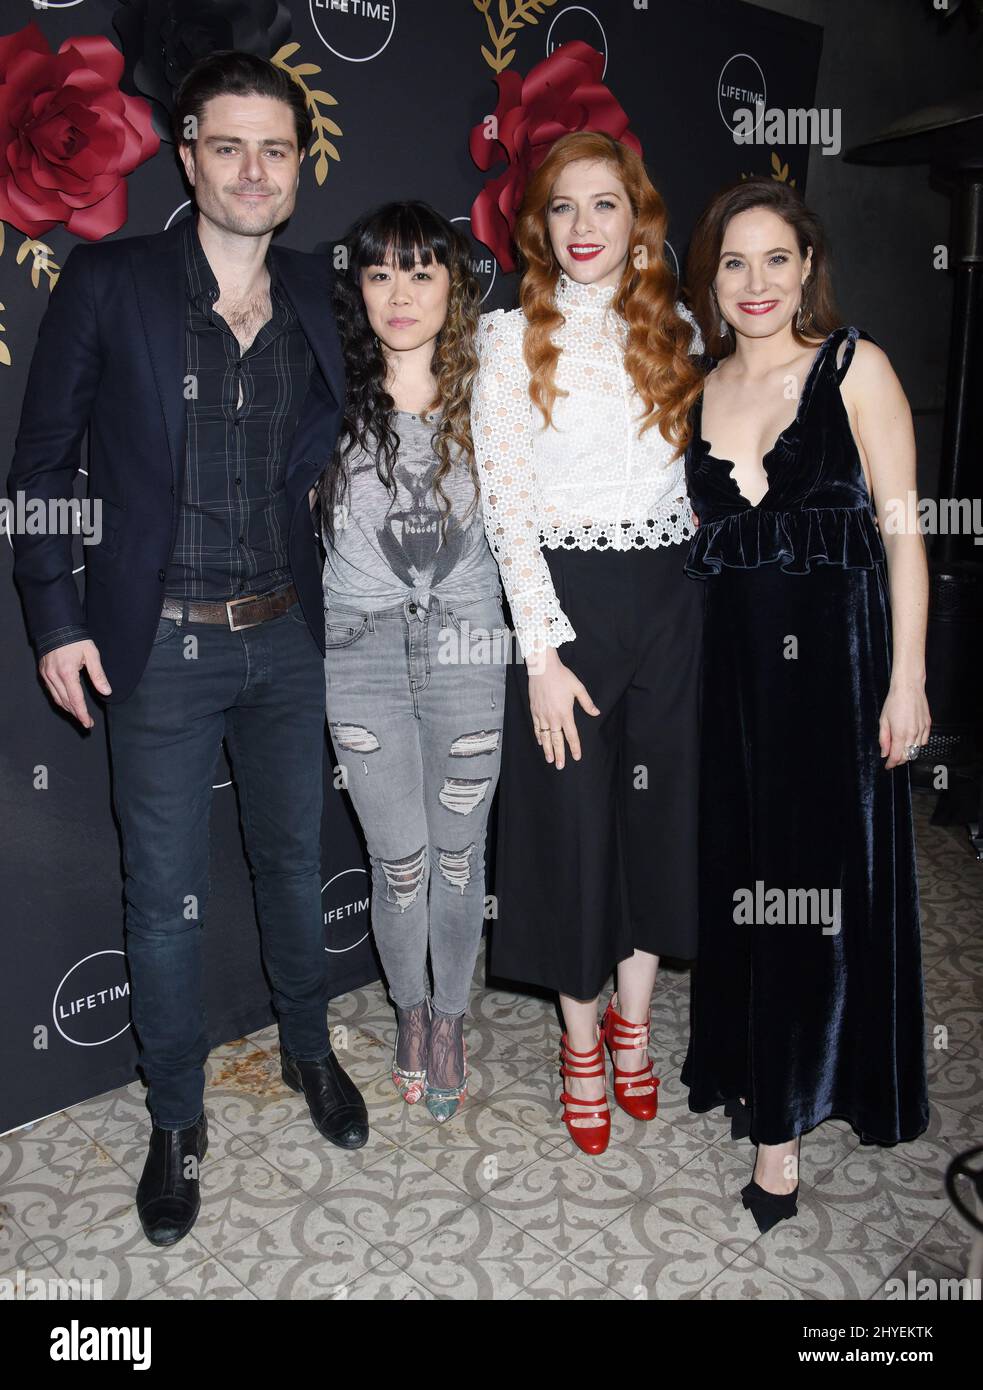 Richard Short, Grace Lynn Kung, Rachelle LeFevre and Caroline Dhavernas arriving for Lifetime's Anti-Valentine's Bash for the 'UnREAL' and 'Mary Kills People' Premieres held at Eveleigh on February 13, 2018 in West Hollywood, Los Angeles Stock Photo